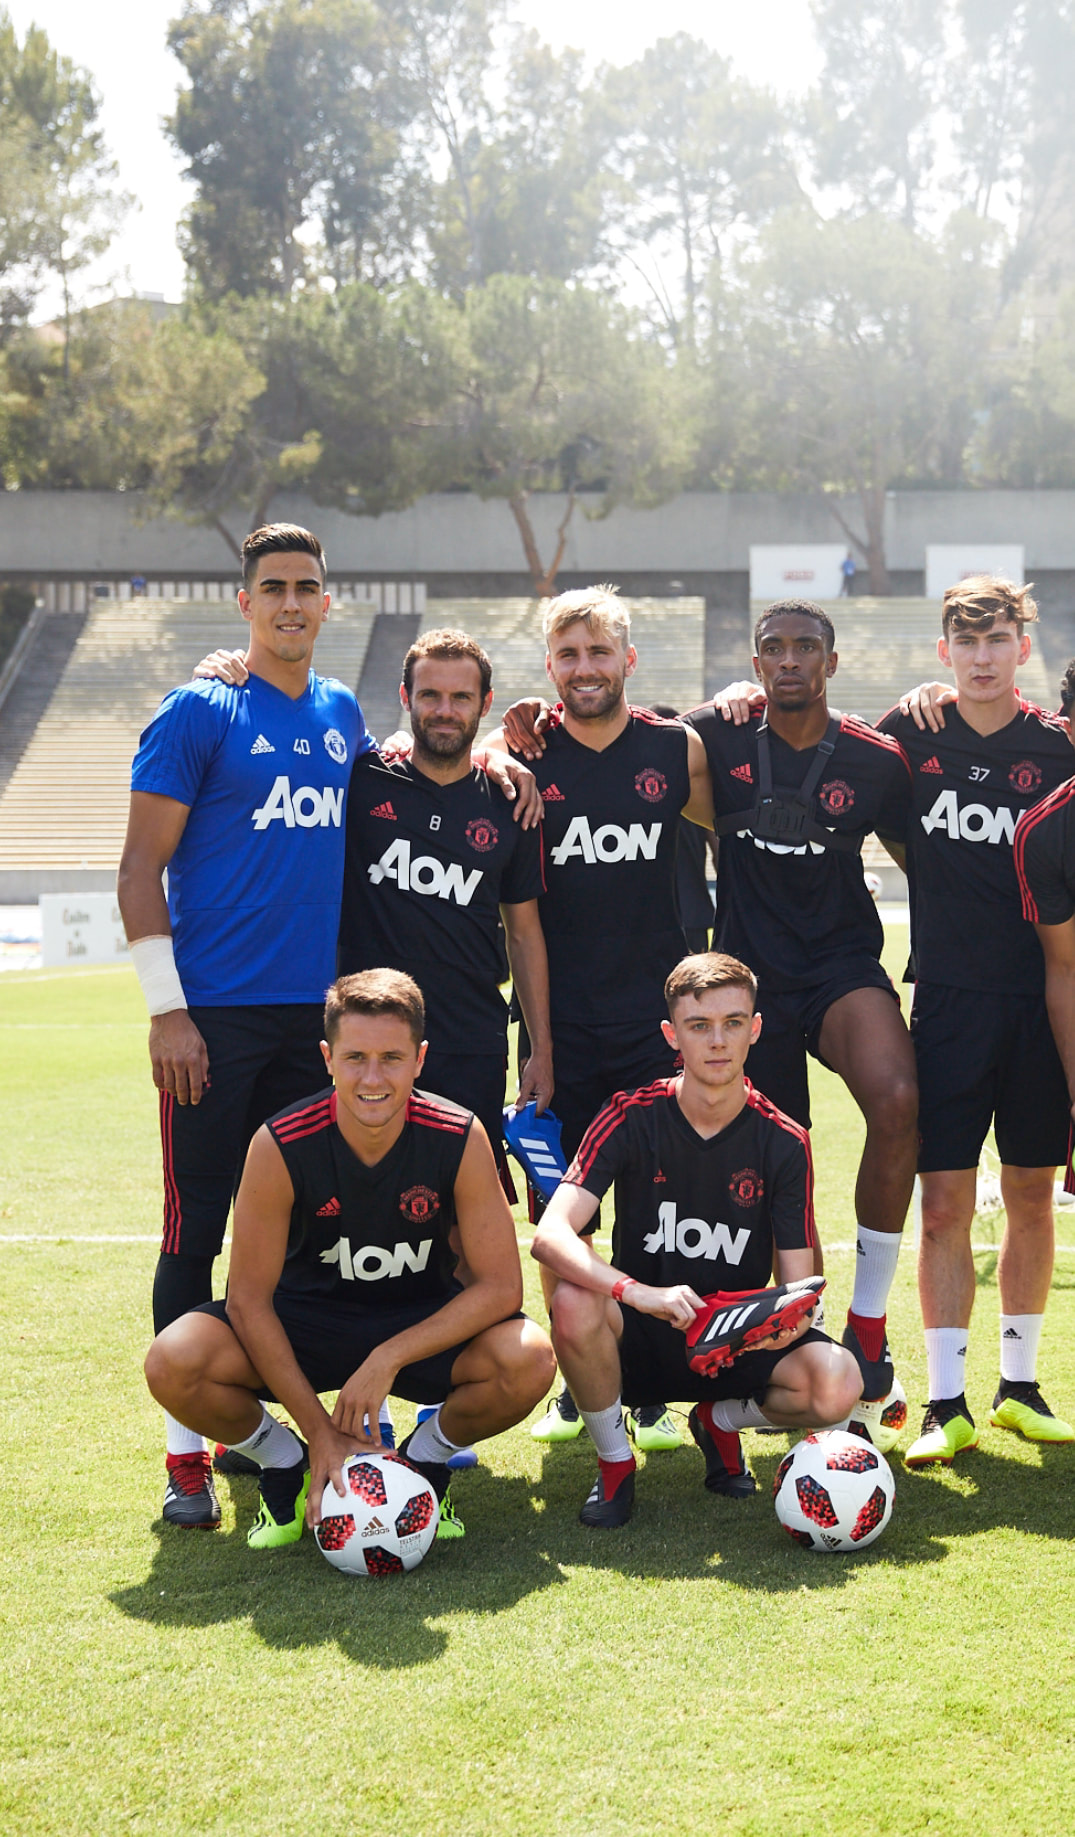 Picture TNFreestyle / Tom Nolan training with Manchester United in LA